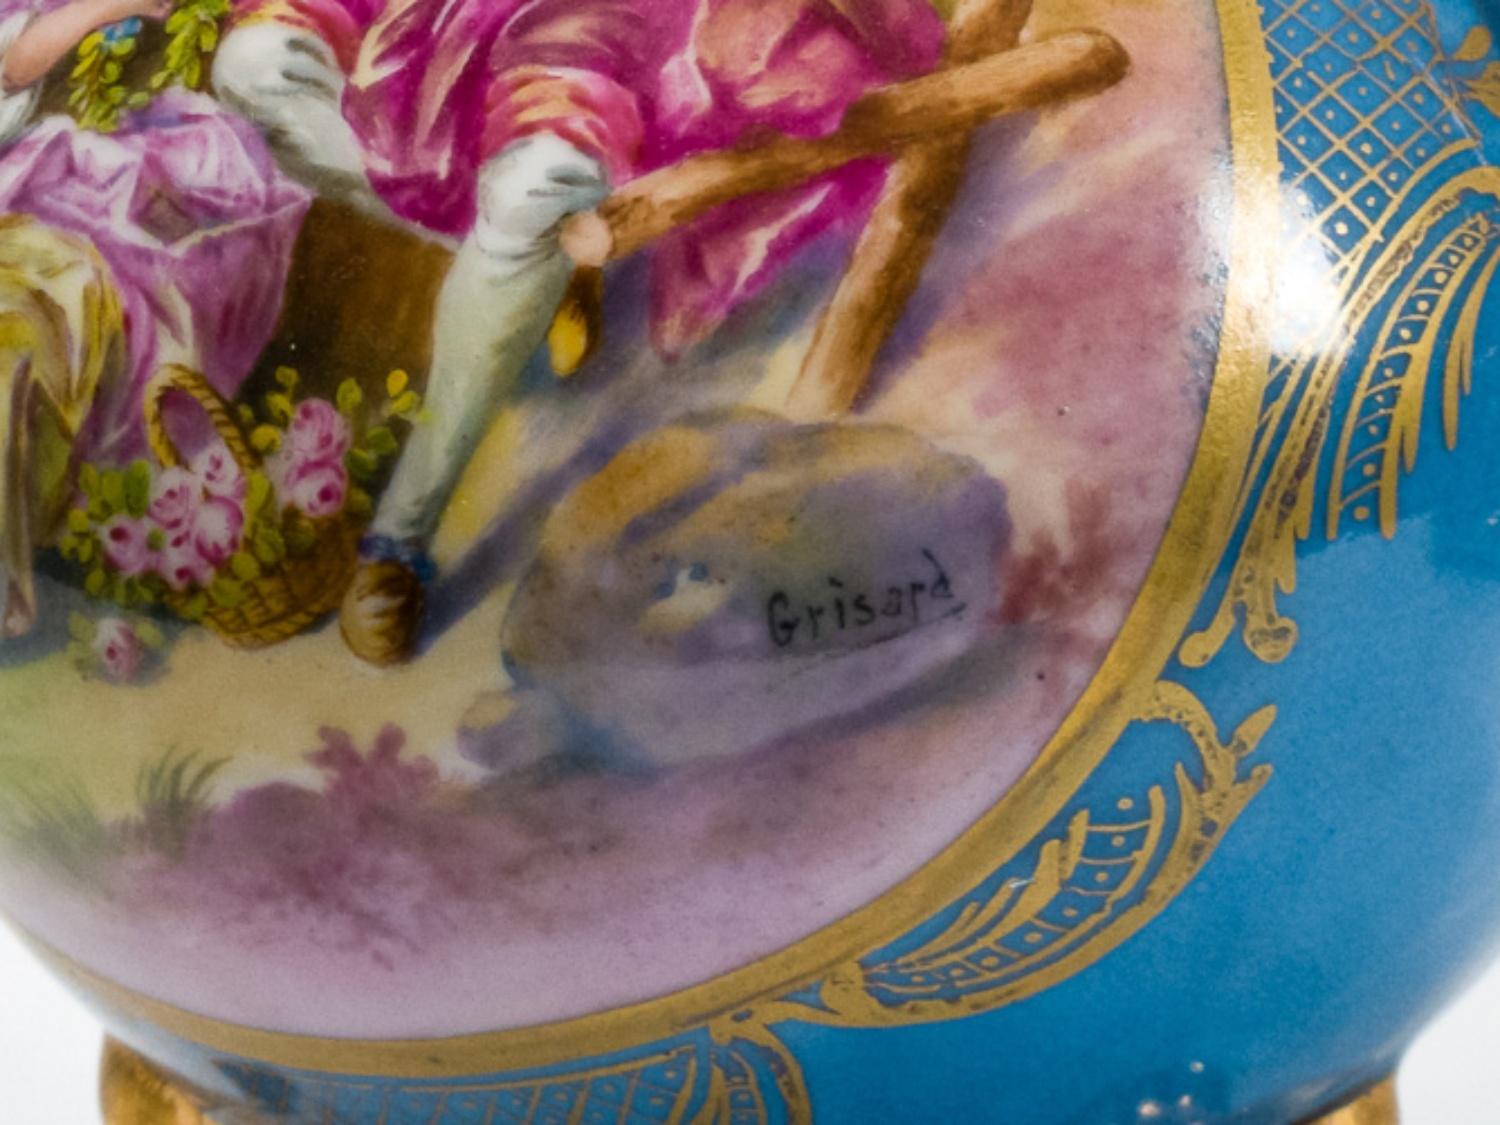 Rococo Revival Sevres Porcelain Tea Service By 'E. Grisard', 19th Century For Sale